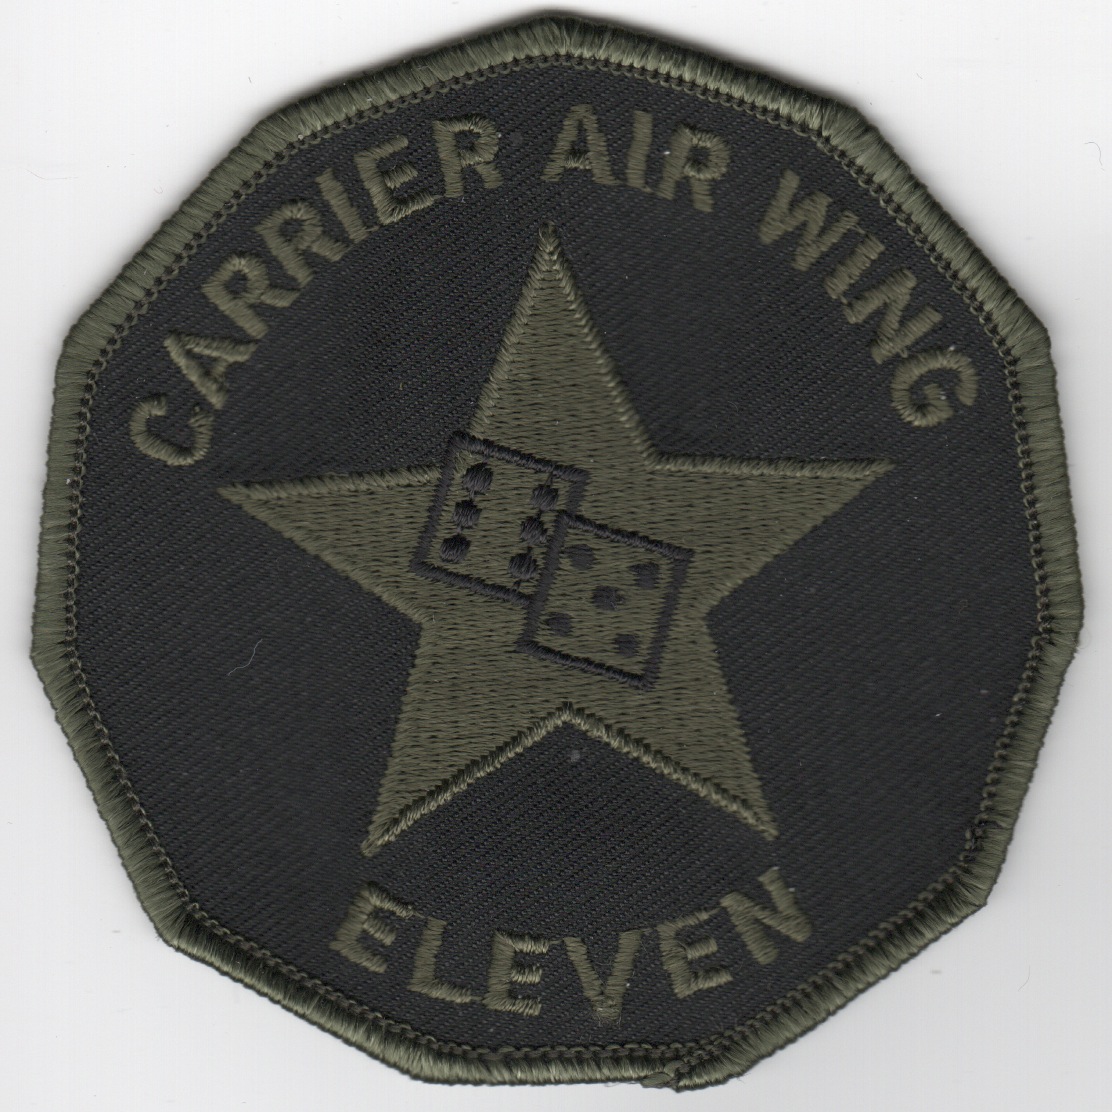 CVW-11 'Polygon' Patch (Subdued)